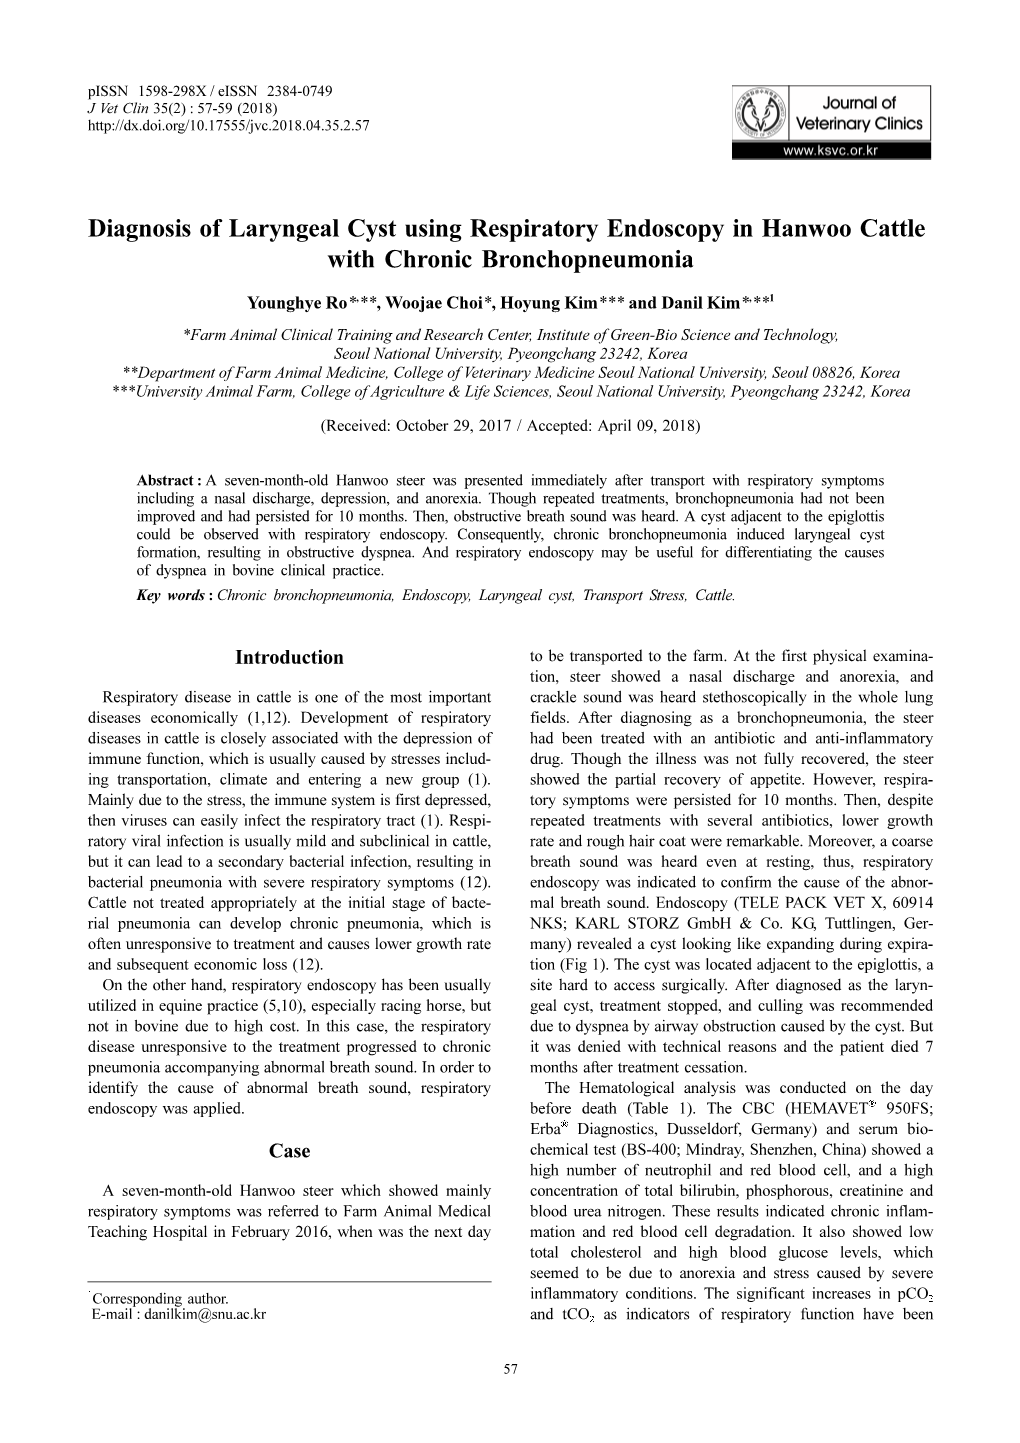 Diagnosis of Laryngeal Cyst Using Respiratory Endoscopy in Hanwoo Cattle with Chronic Bronchopneumonia